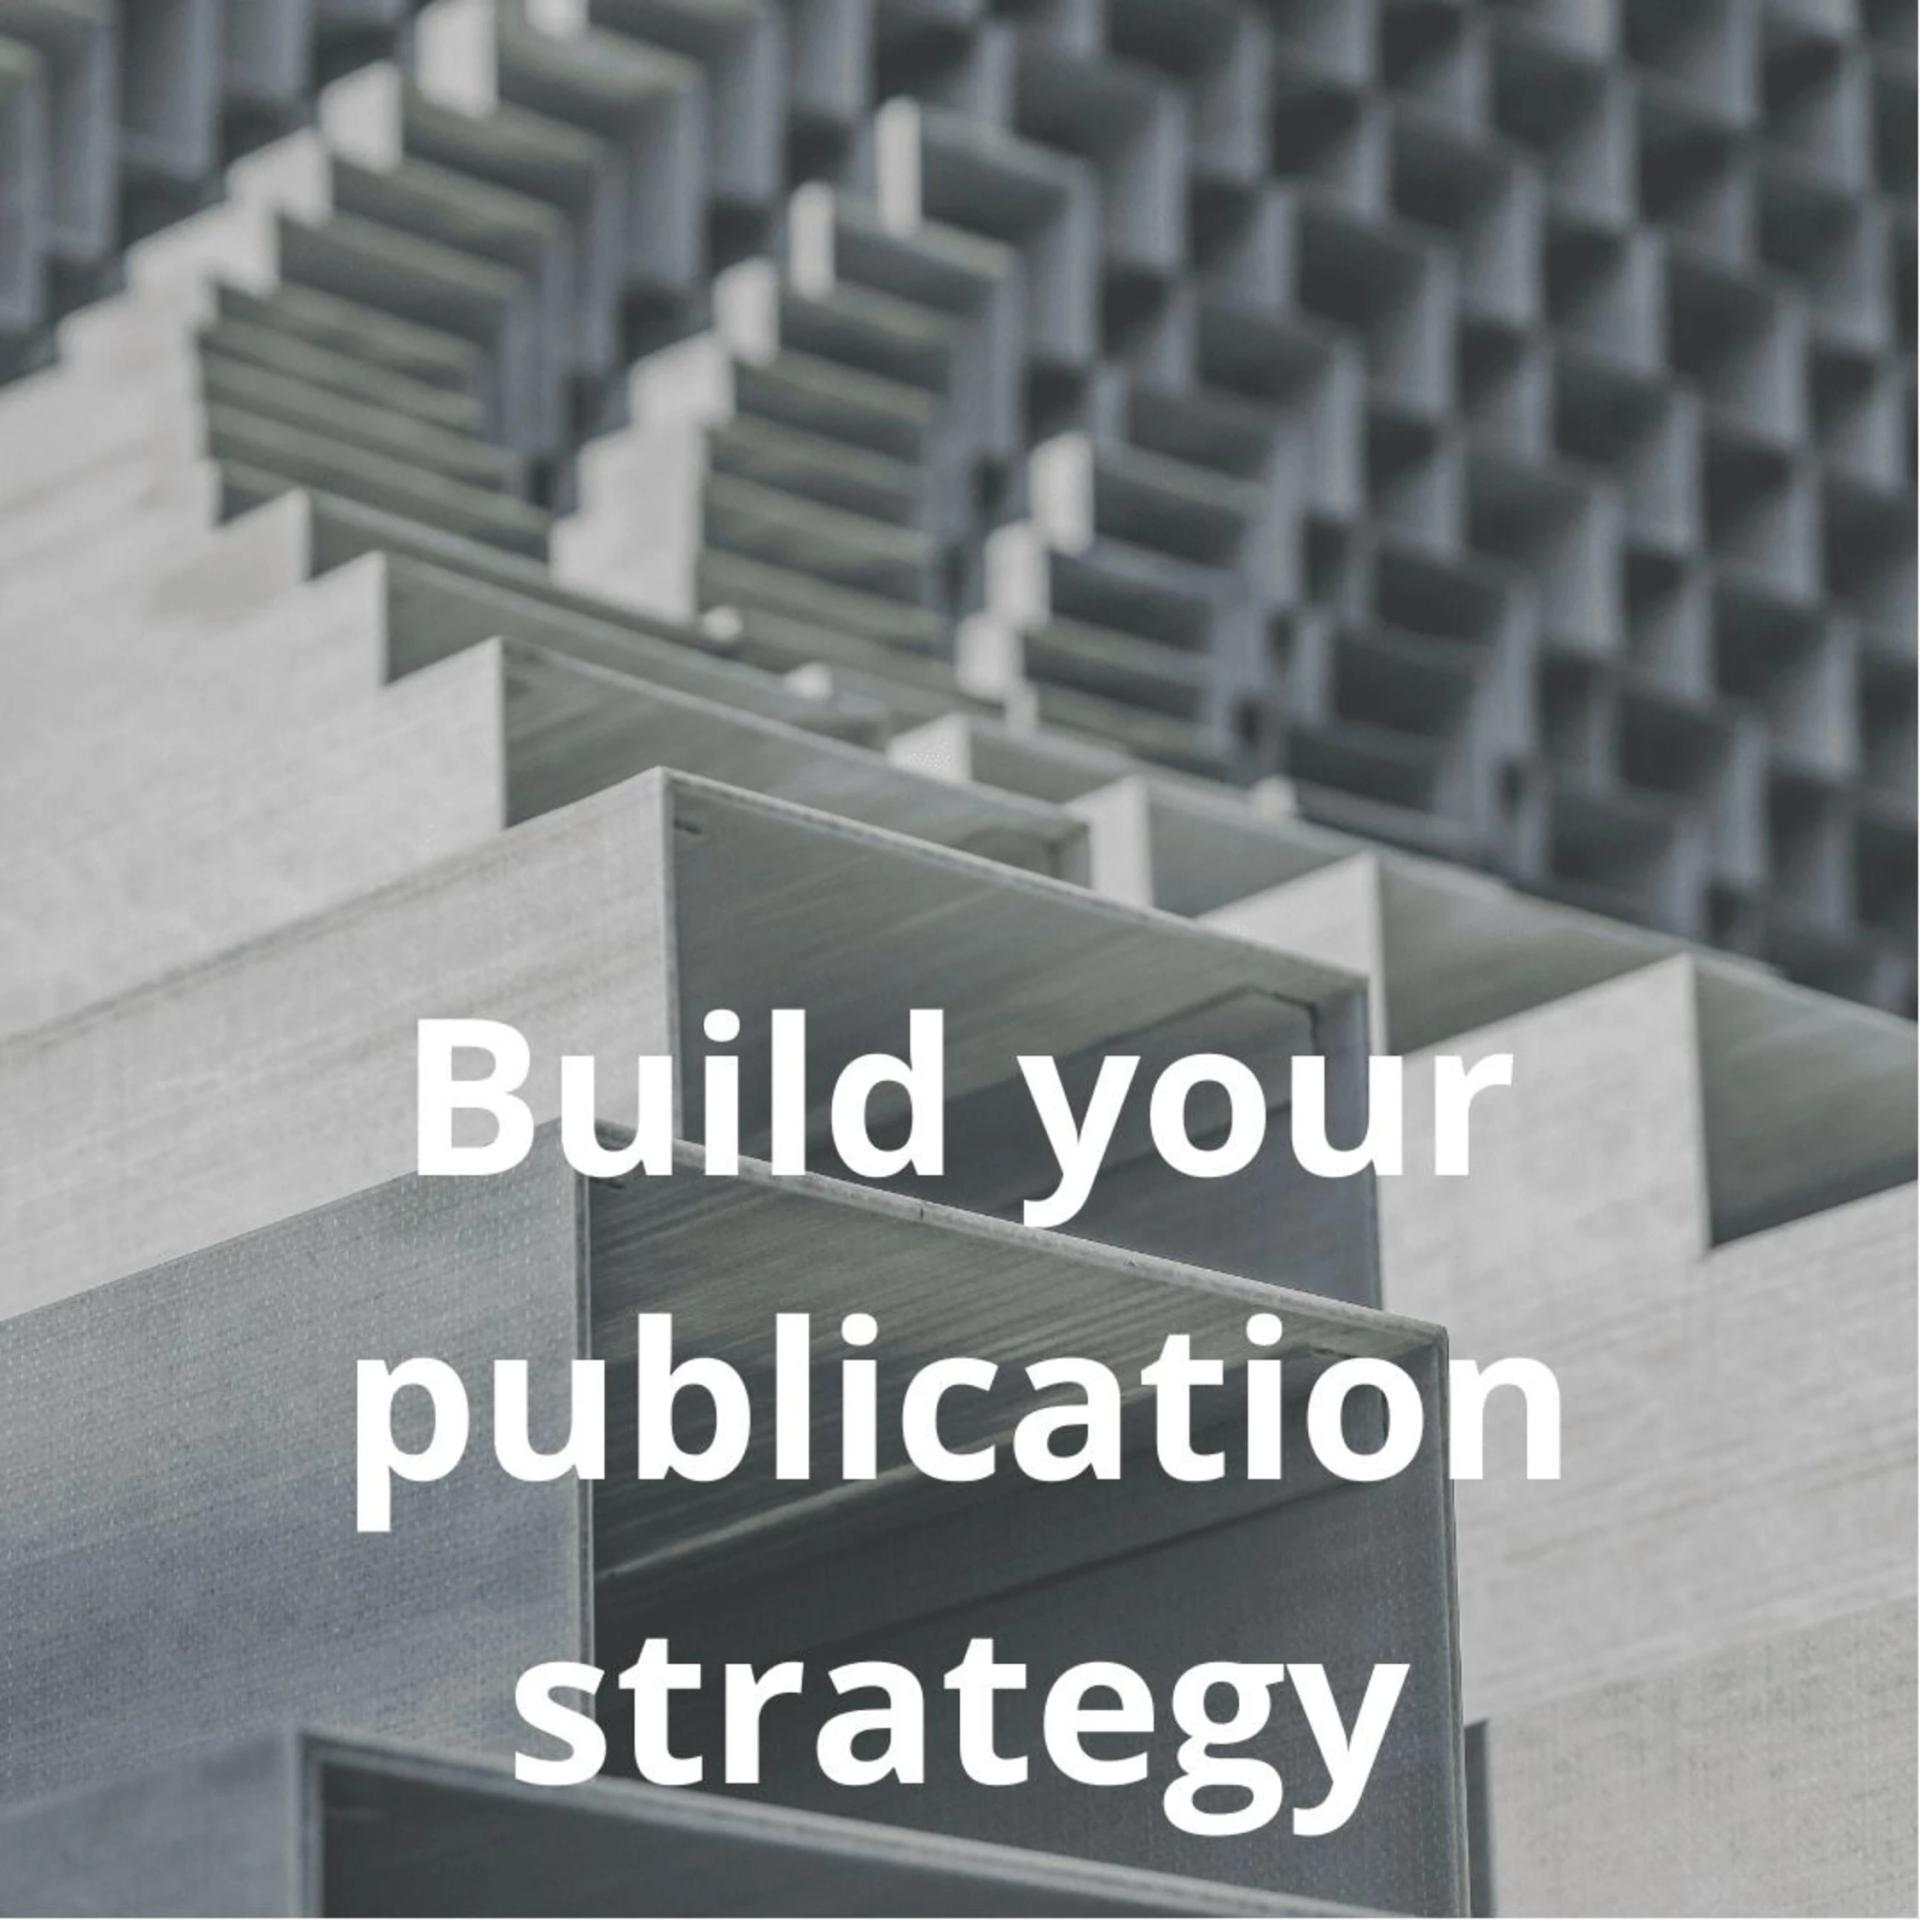 How to set up an efficient publication strategy